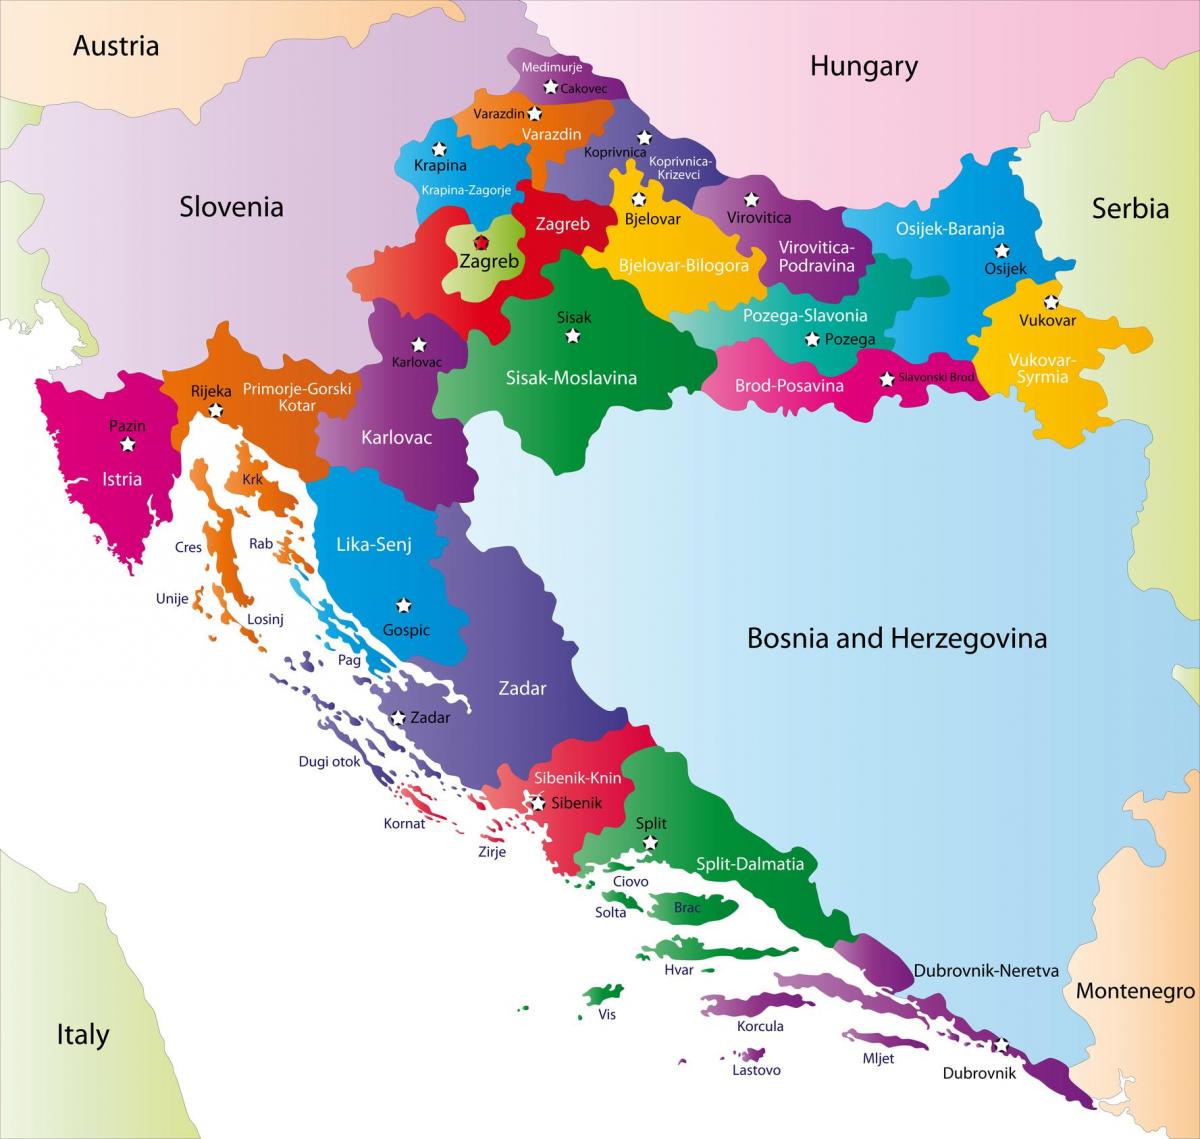 Croatia maps transports, geography and tourist maps of Croatia in